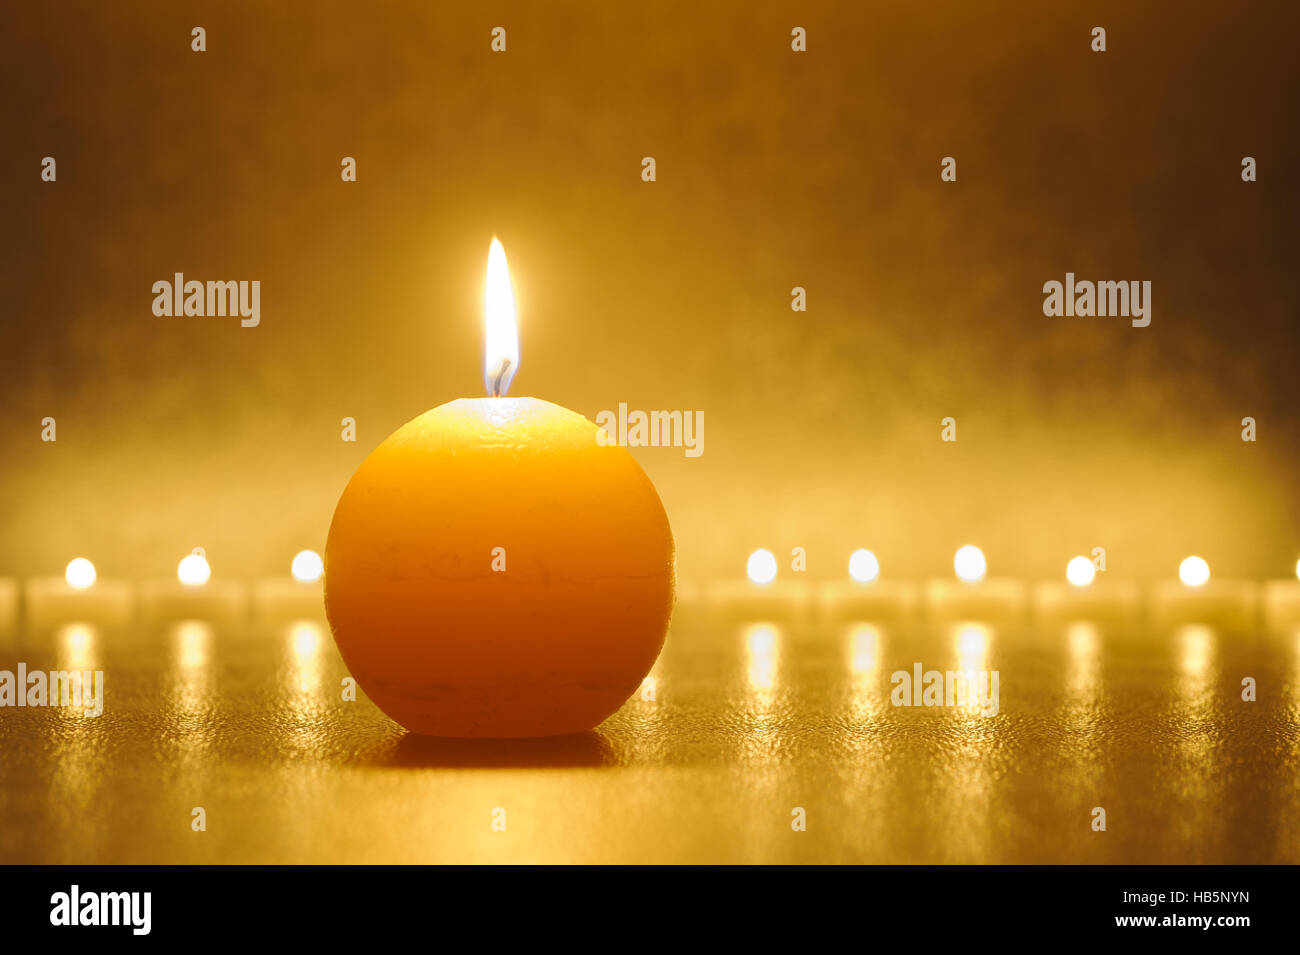 burning candle light in warm color Stock Photo